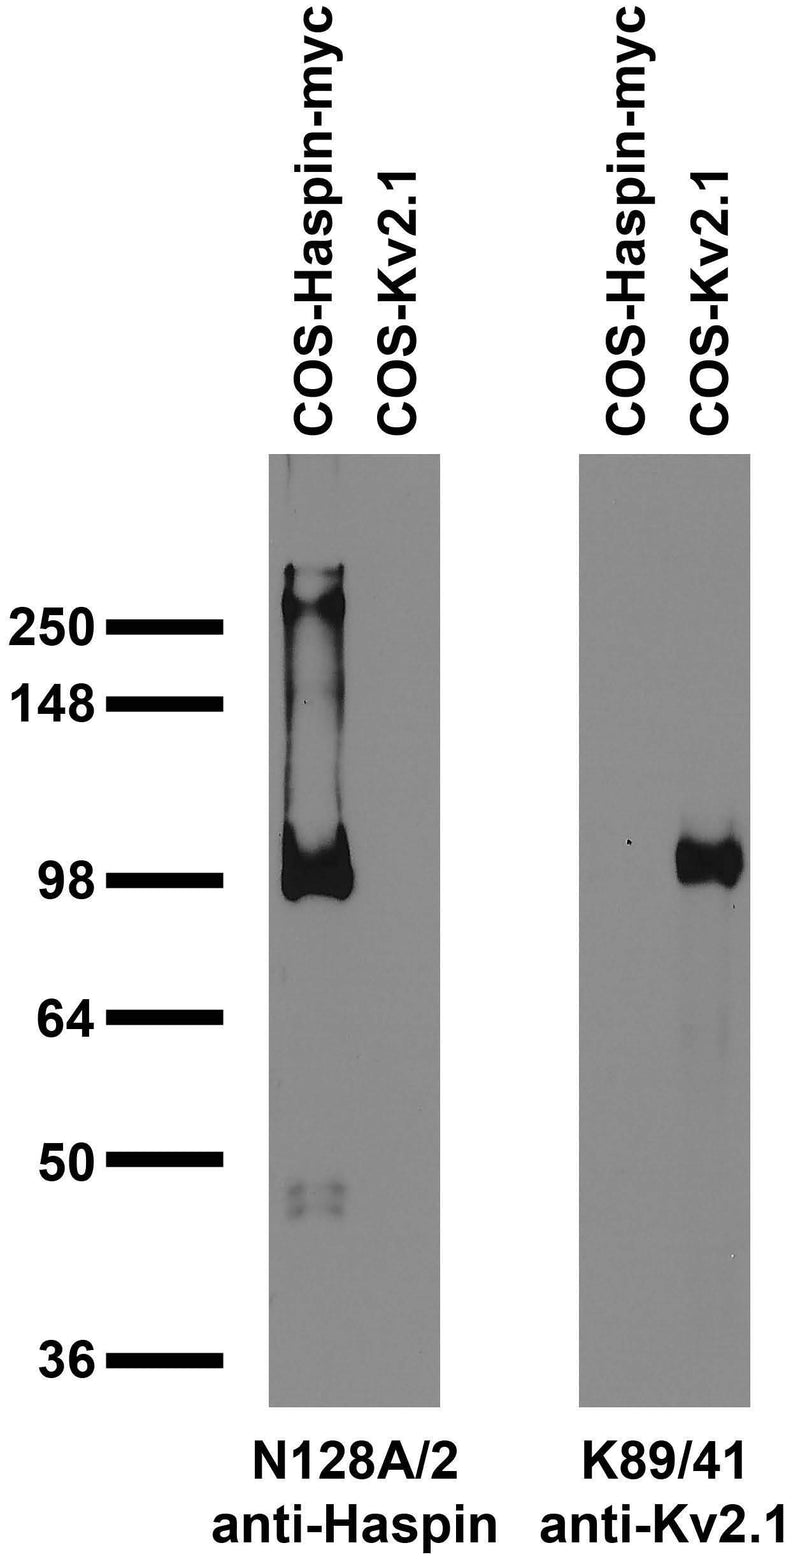 Transfected cell immunoblot: extracts of COS cells transfected with Myc- tagged human Haspin and untagged Kv2.1 plasmids and probed with N128A/2 (left) and K89/41 (right) tissue culture supernatant.